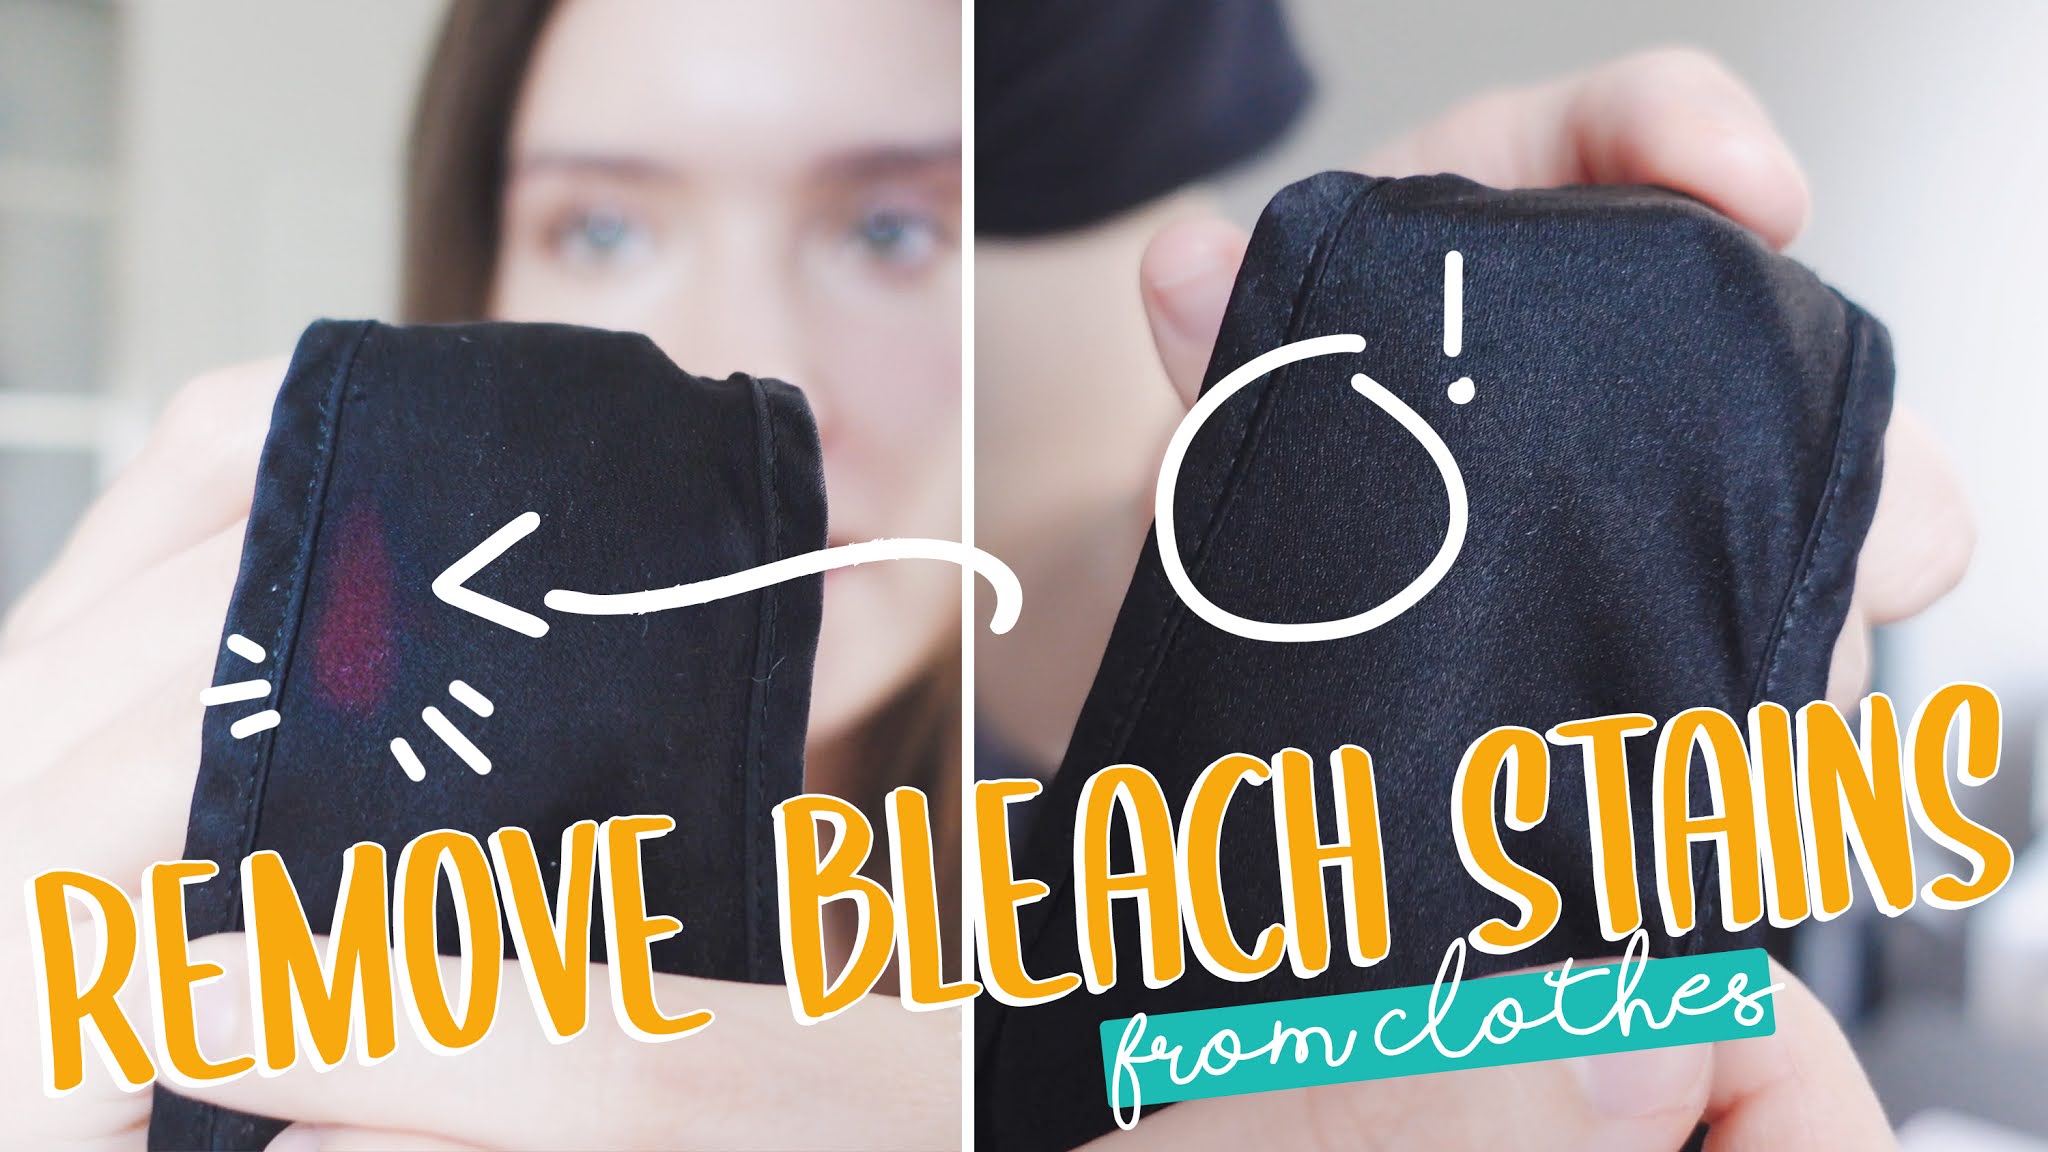 julia caban: How to remove Bleach Stains from clothes